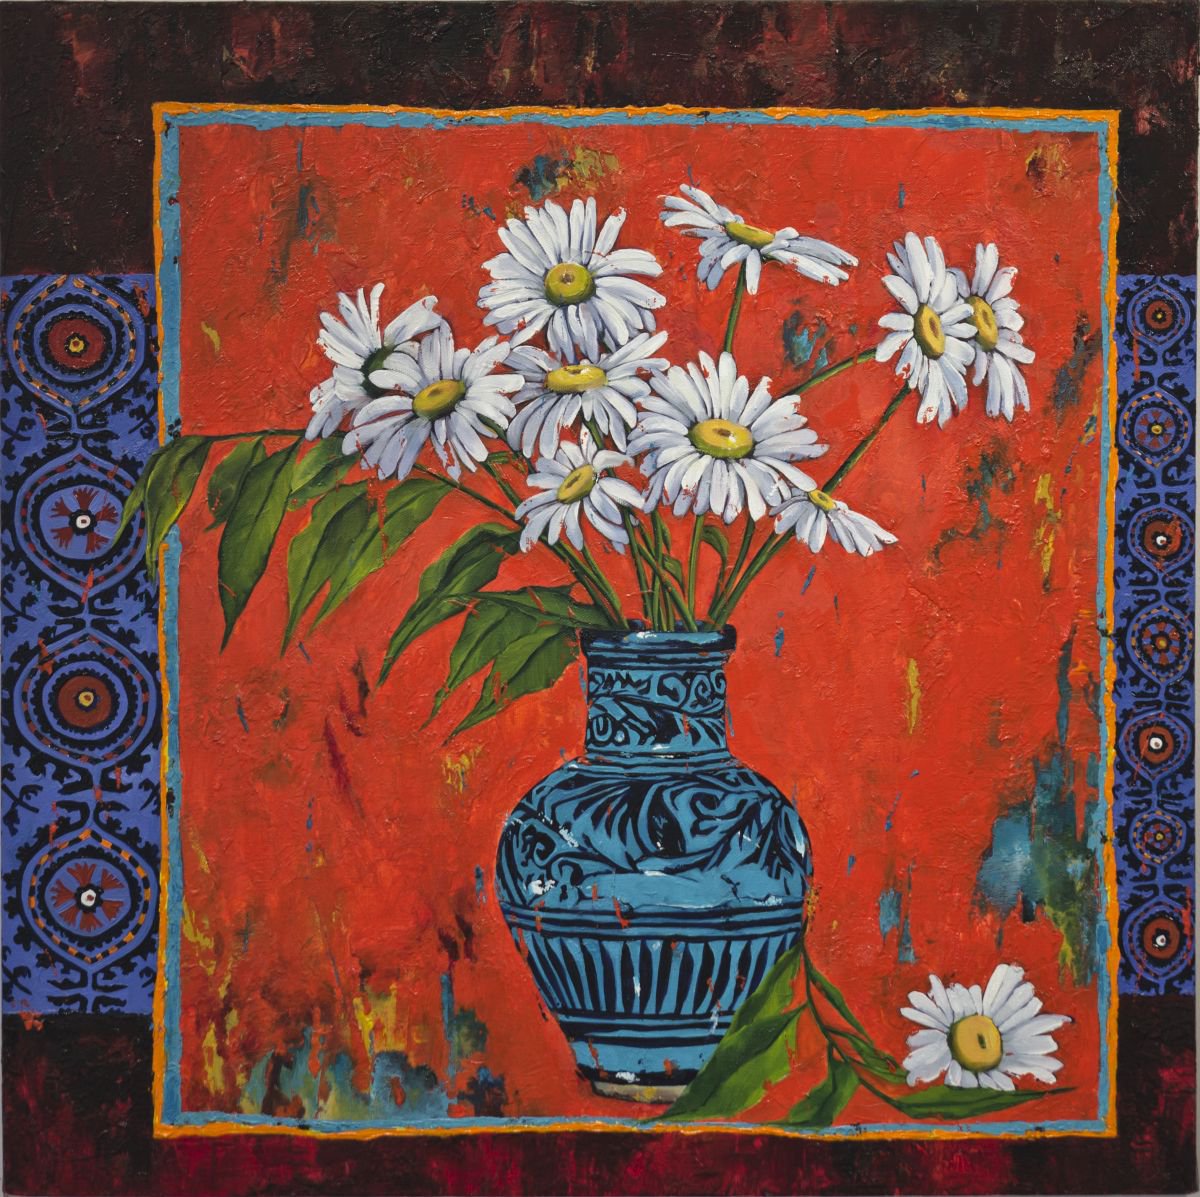 Daisy Flowers in a Vase - Vibrant and Warm - 61x61cm - original Oil painting on Canvas by Mahtab Alizadeh